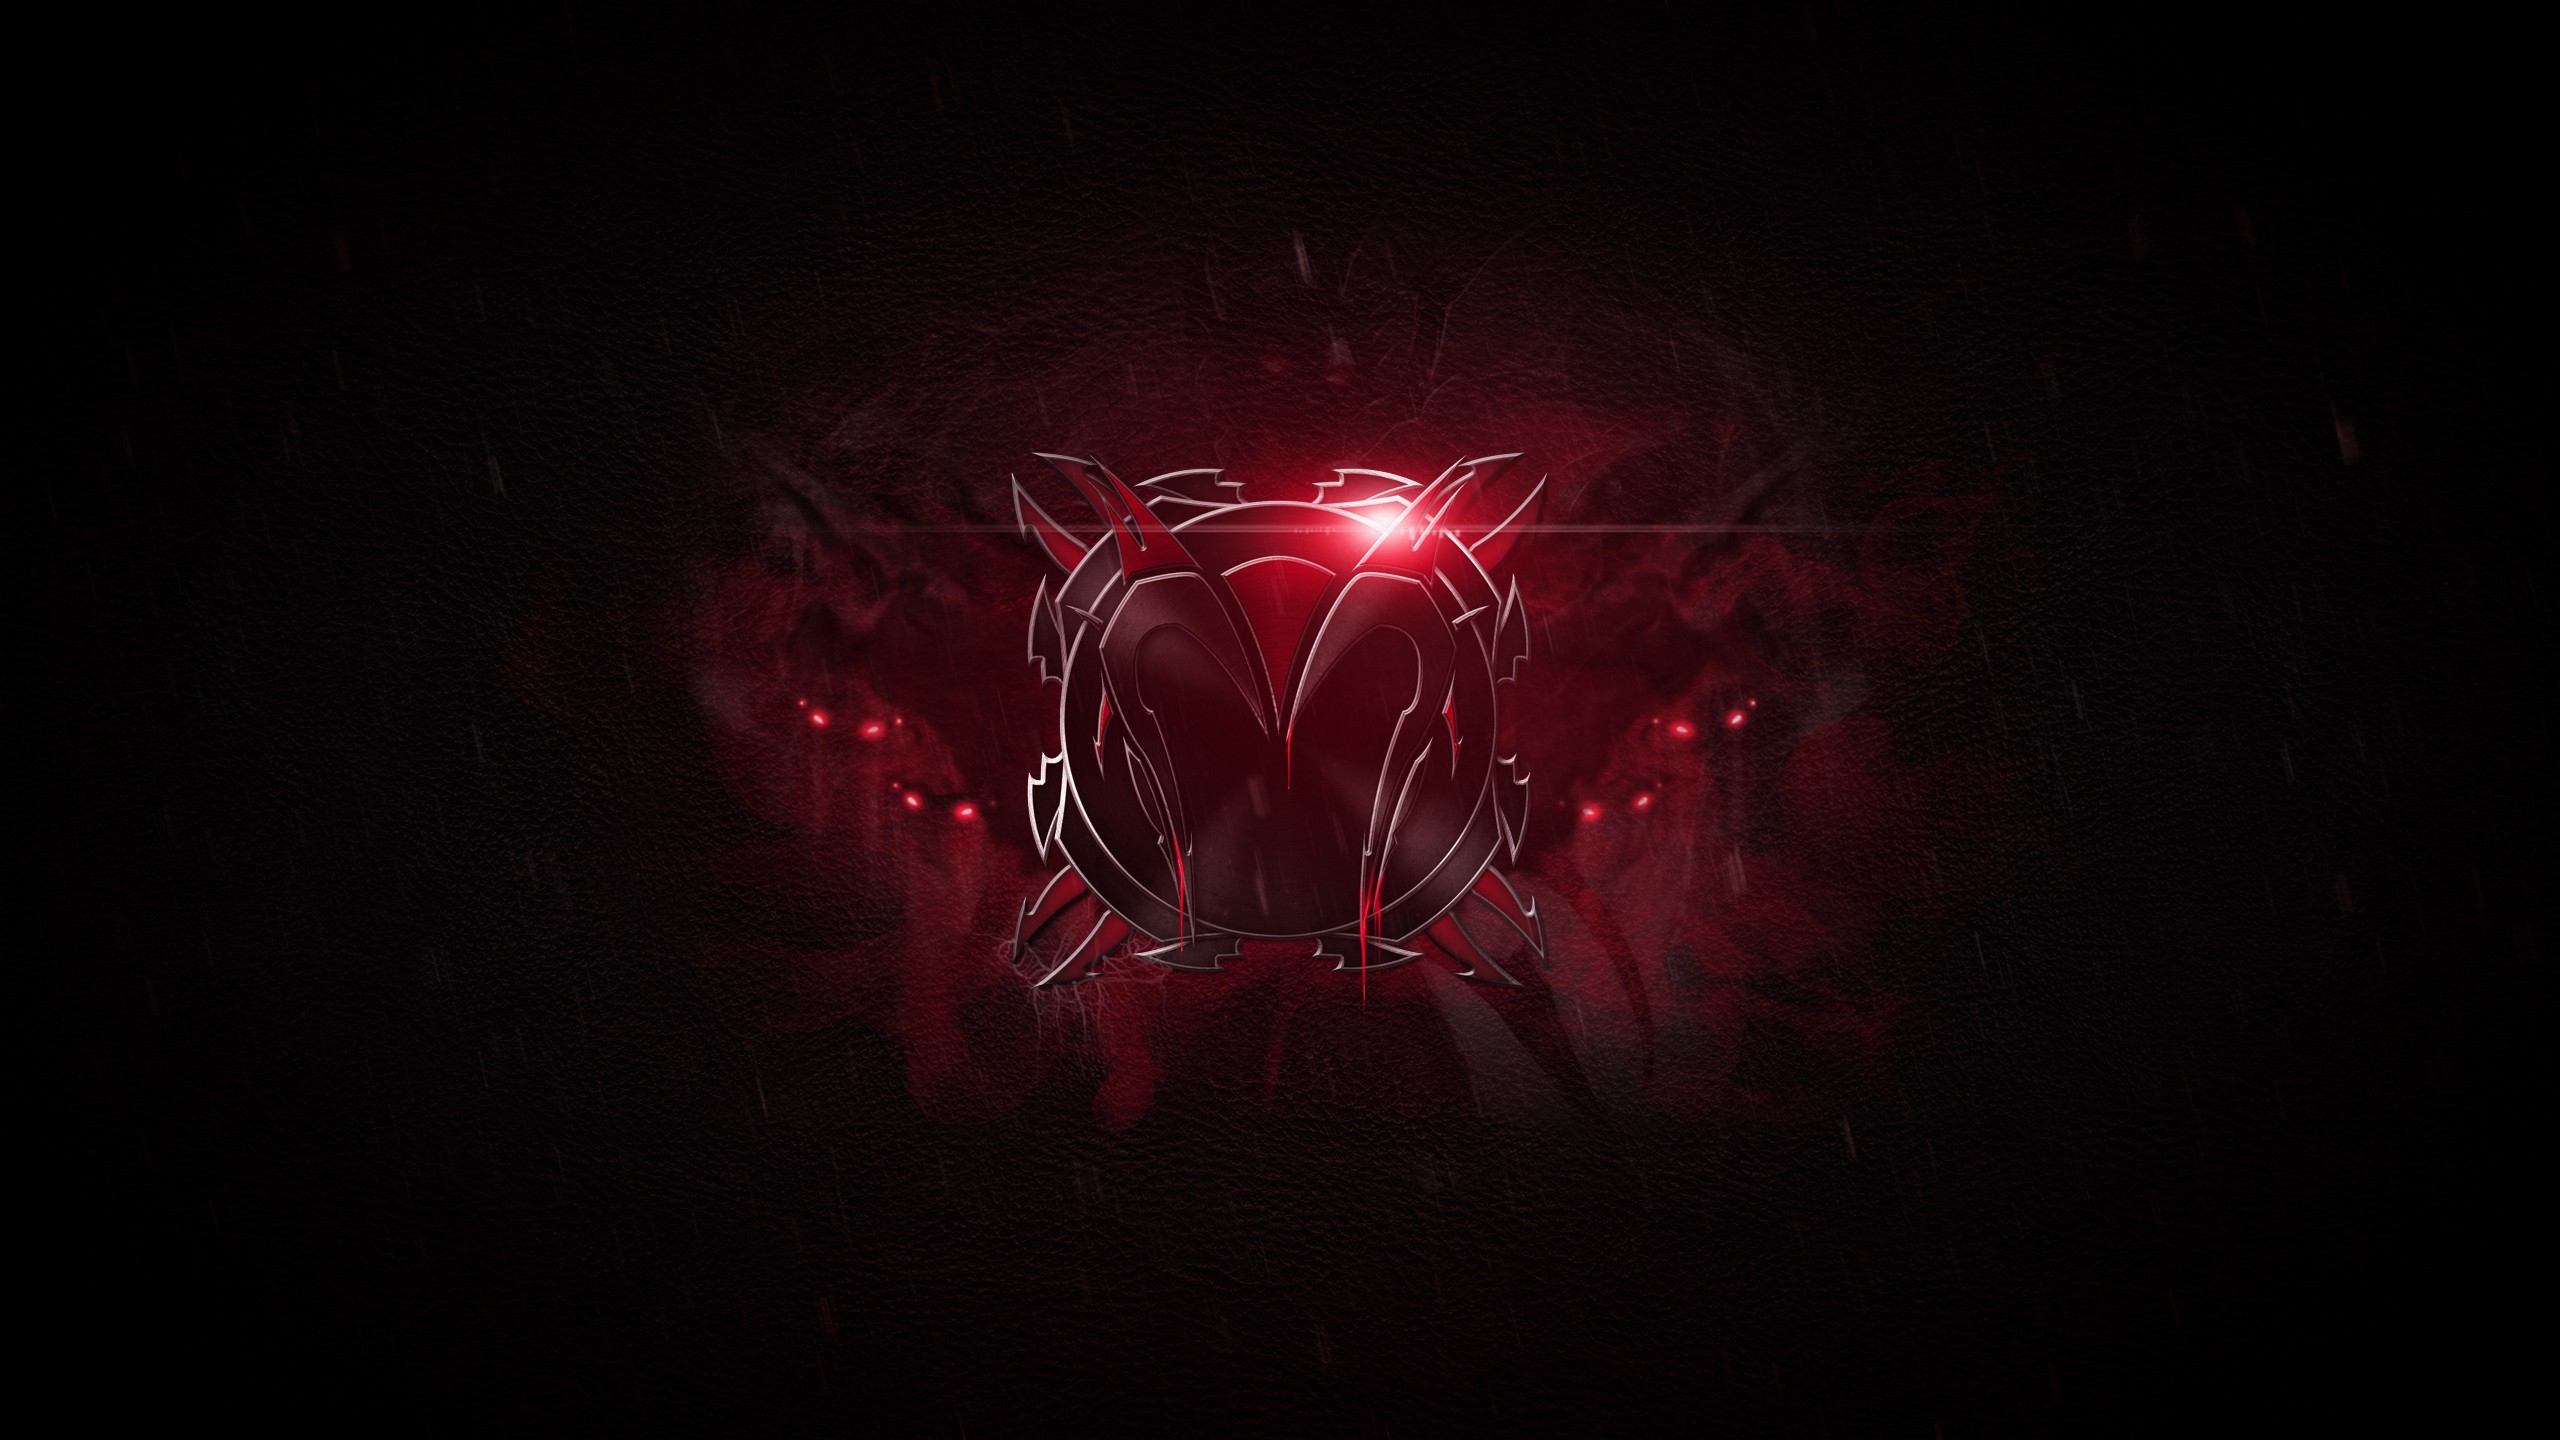 General 2560x1440 Riot Games League of Legends PC gaming red